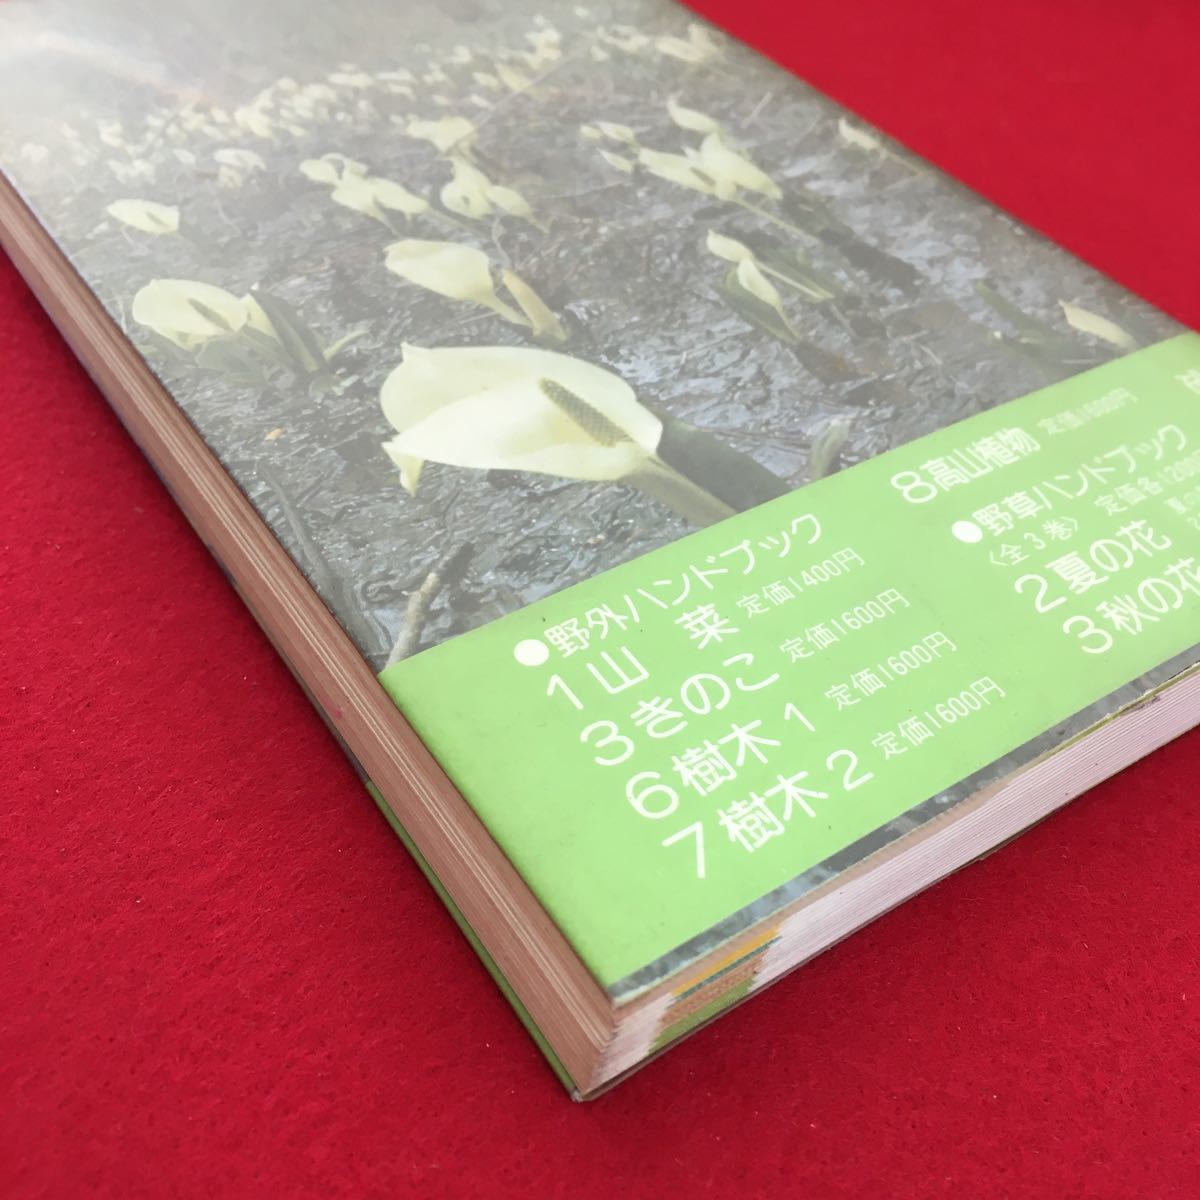 h-222*6/ wild grasses hand book Ⅰ spring. flower Showa era 55 year 1 month 5 day 11 version 1. author ... Hara issue person Kawasaki . light ./ mountain / sea side / the first summer etc. 